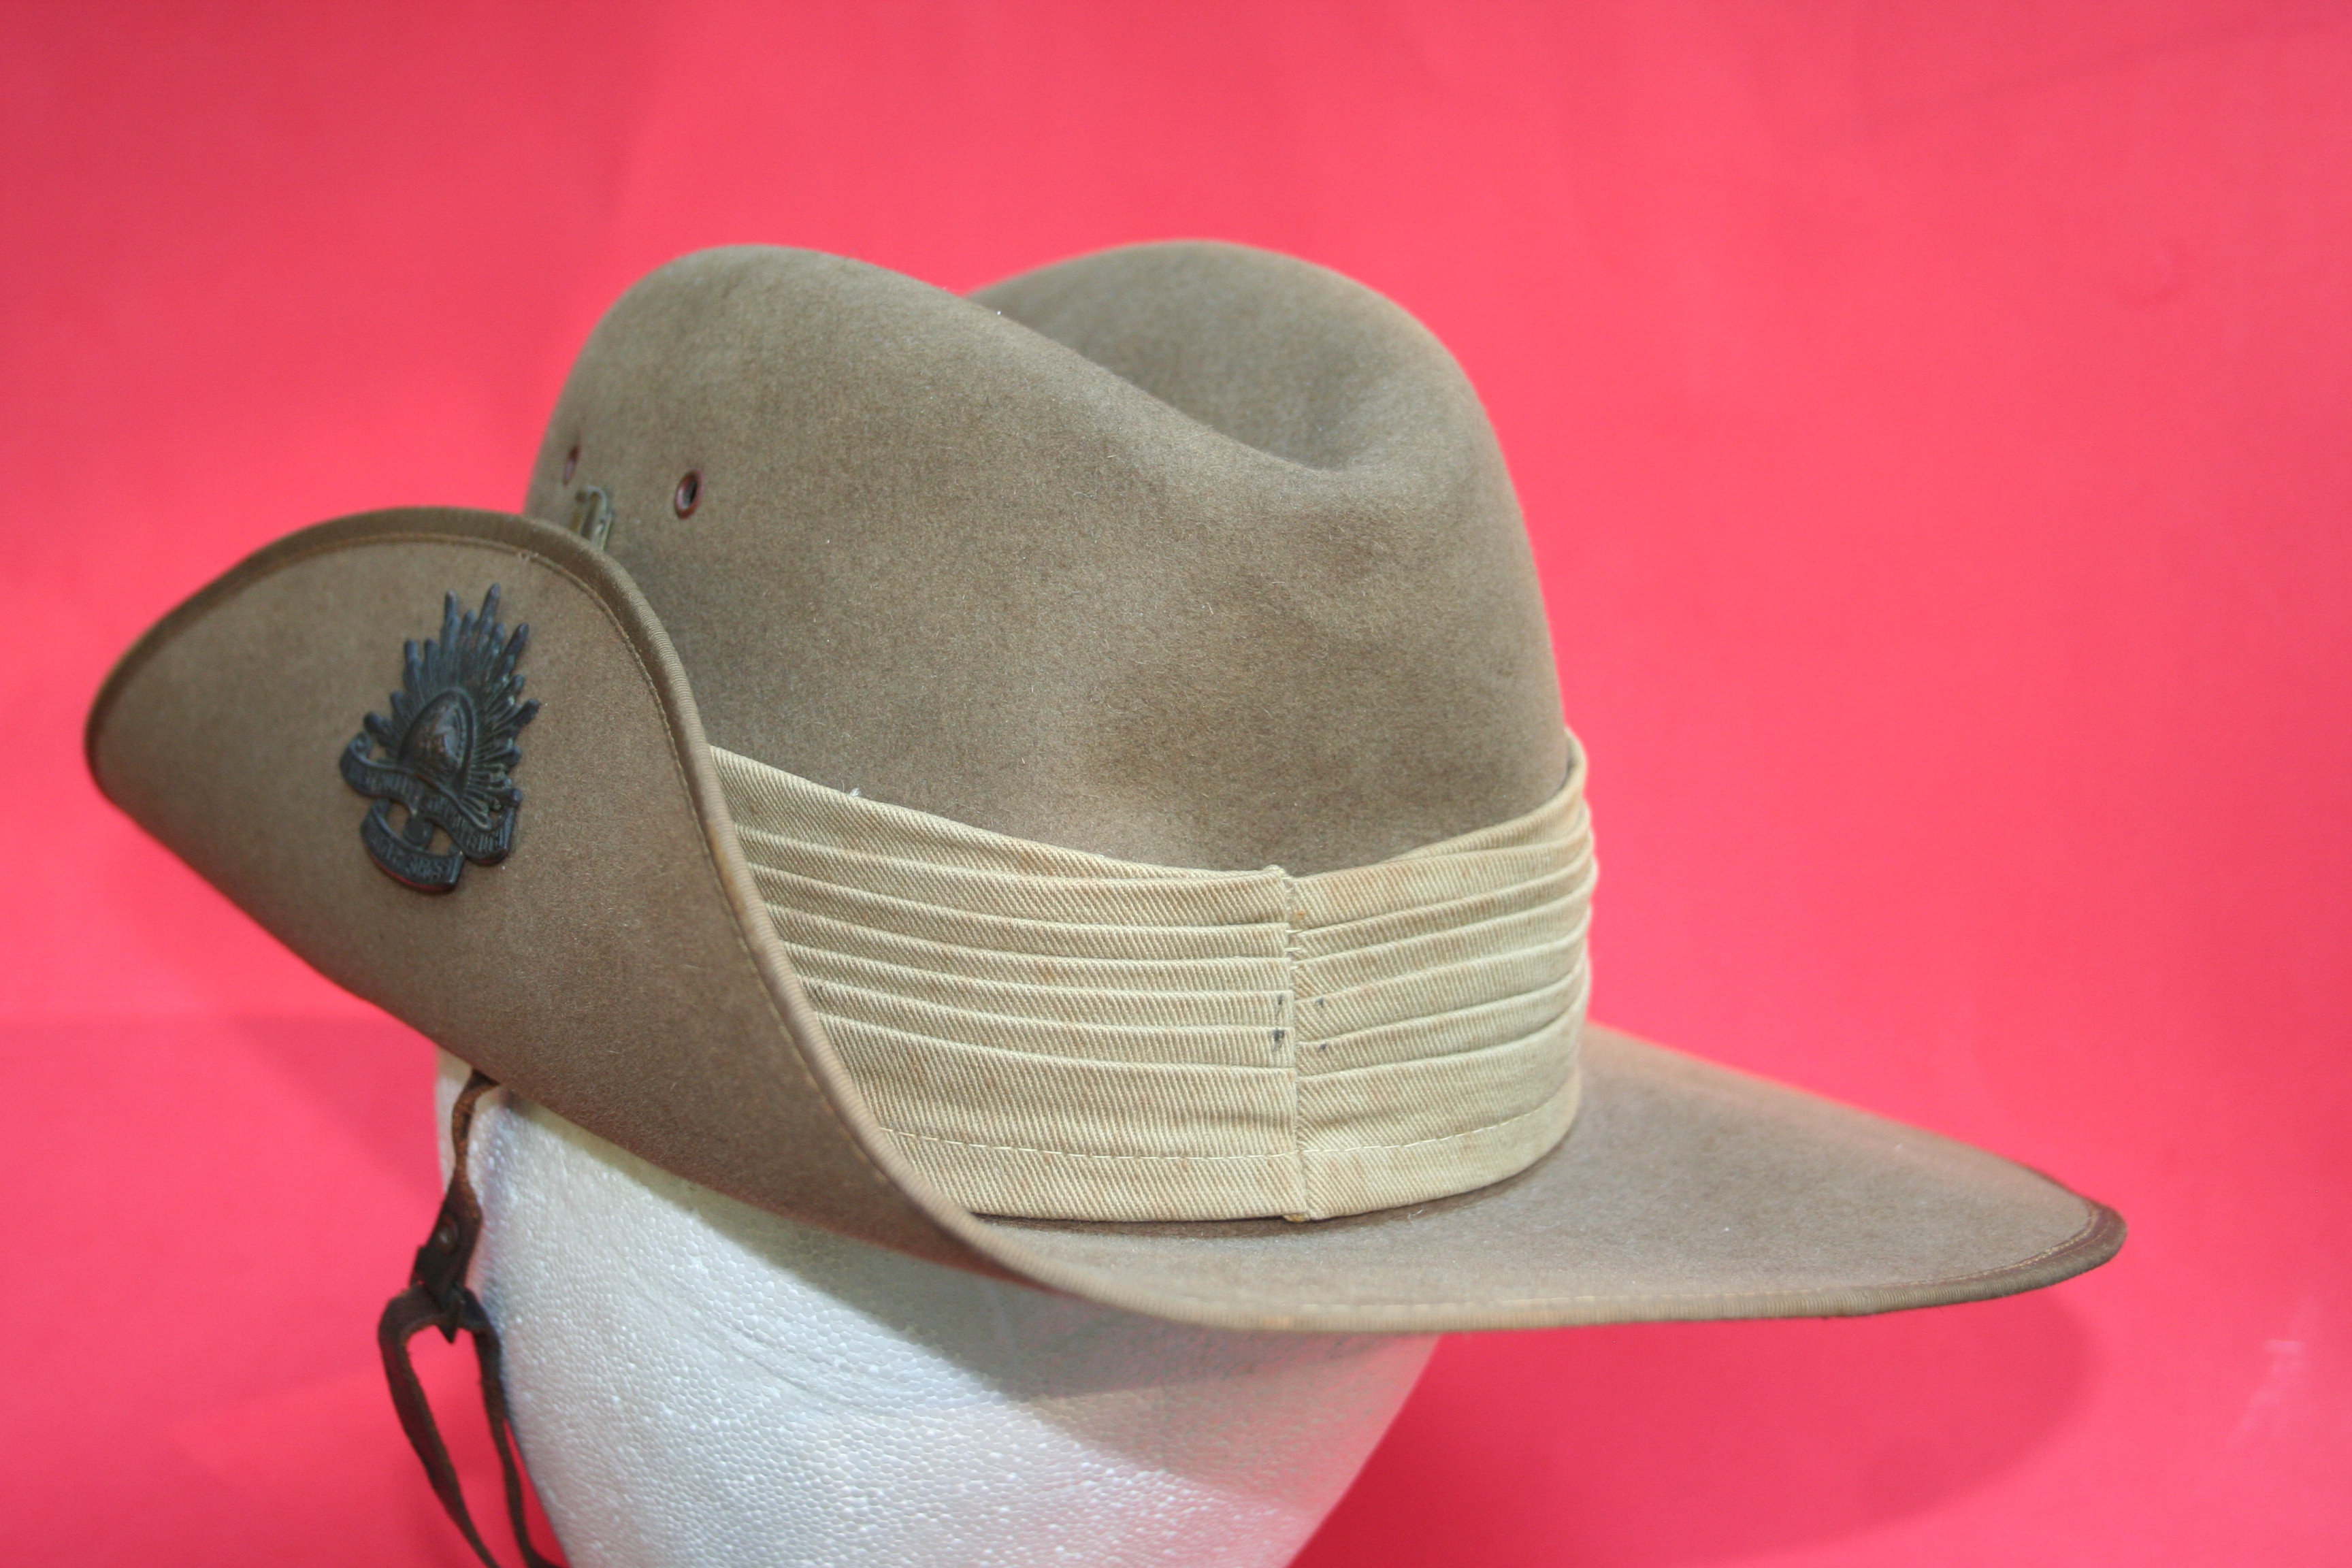 Here is my 1928 dated Australian slouch hat